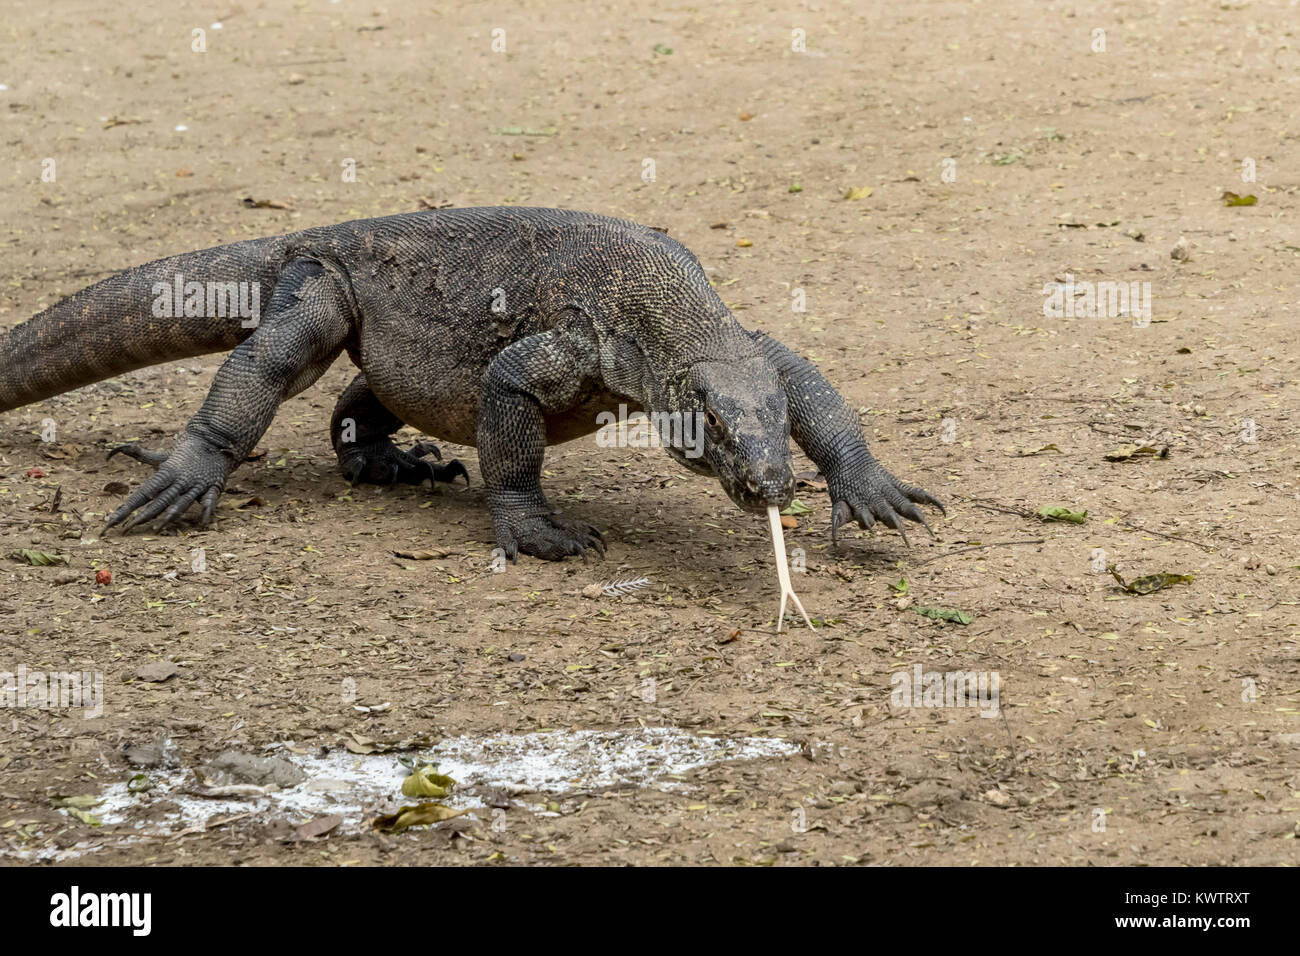 Komodo dragon with forked tongue out and lots of ticks, Loh Buaya Komodo NP, Rinca Island, Indonesia Stock Photo